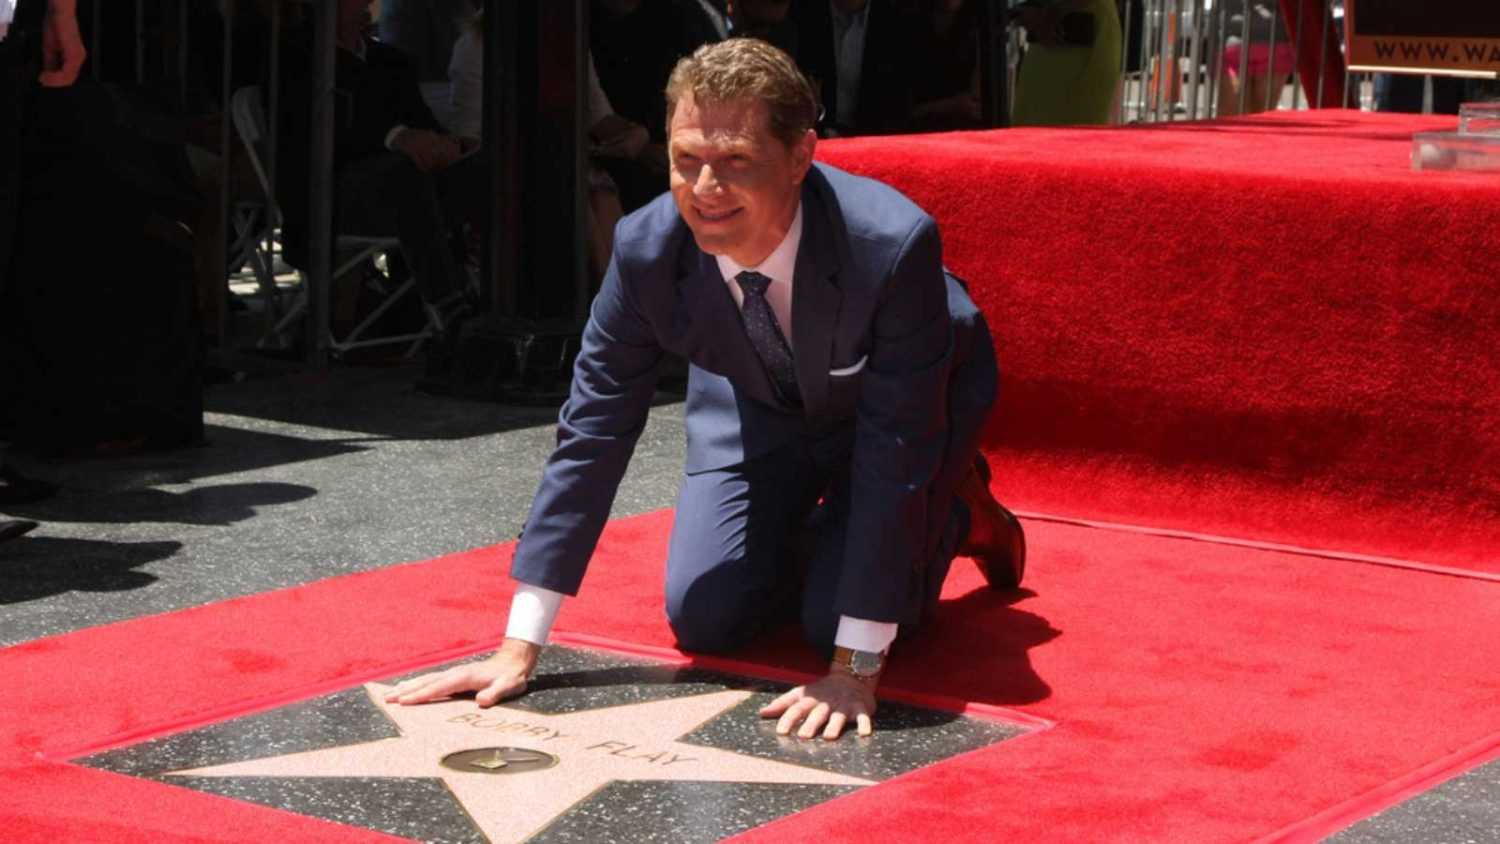 LOS ANGELES - JUN 2: Bobby Flay at the Bobby Flay Hollywood Walk of Fame Ceremony at the Hollywood Blvd on June 2, 2015 in Los Angeles, CA